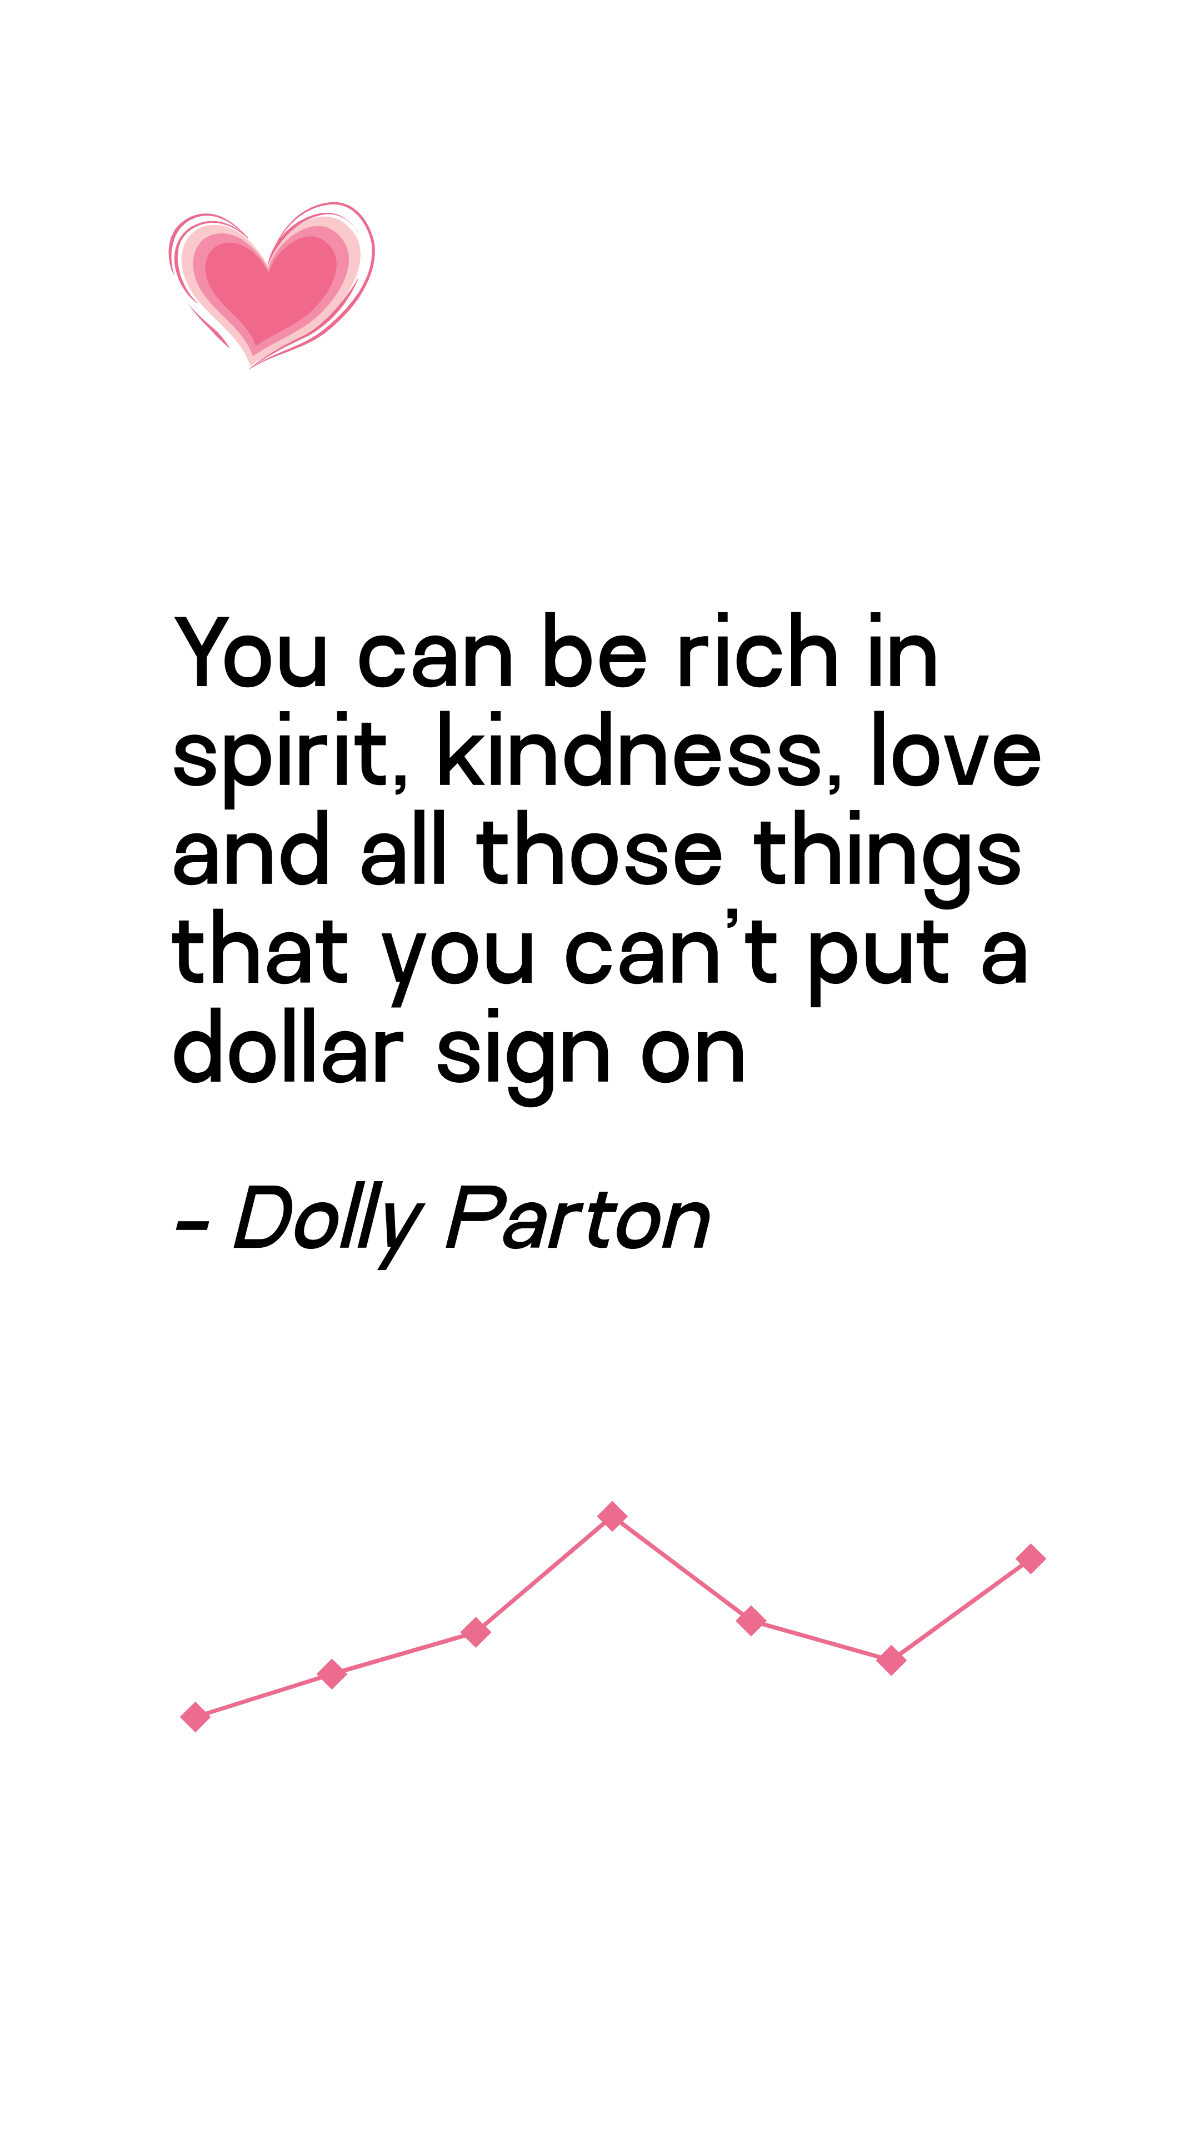 Free Dolly Parton - You can be rich in spirit, kindness, love and all those things that you can't put a dollar sign on Template